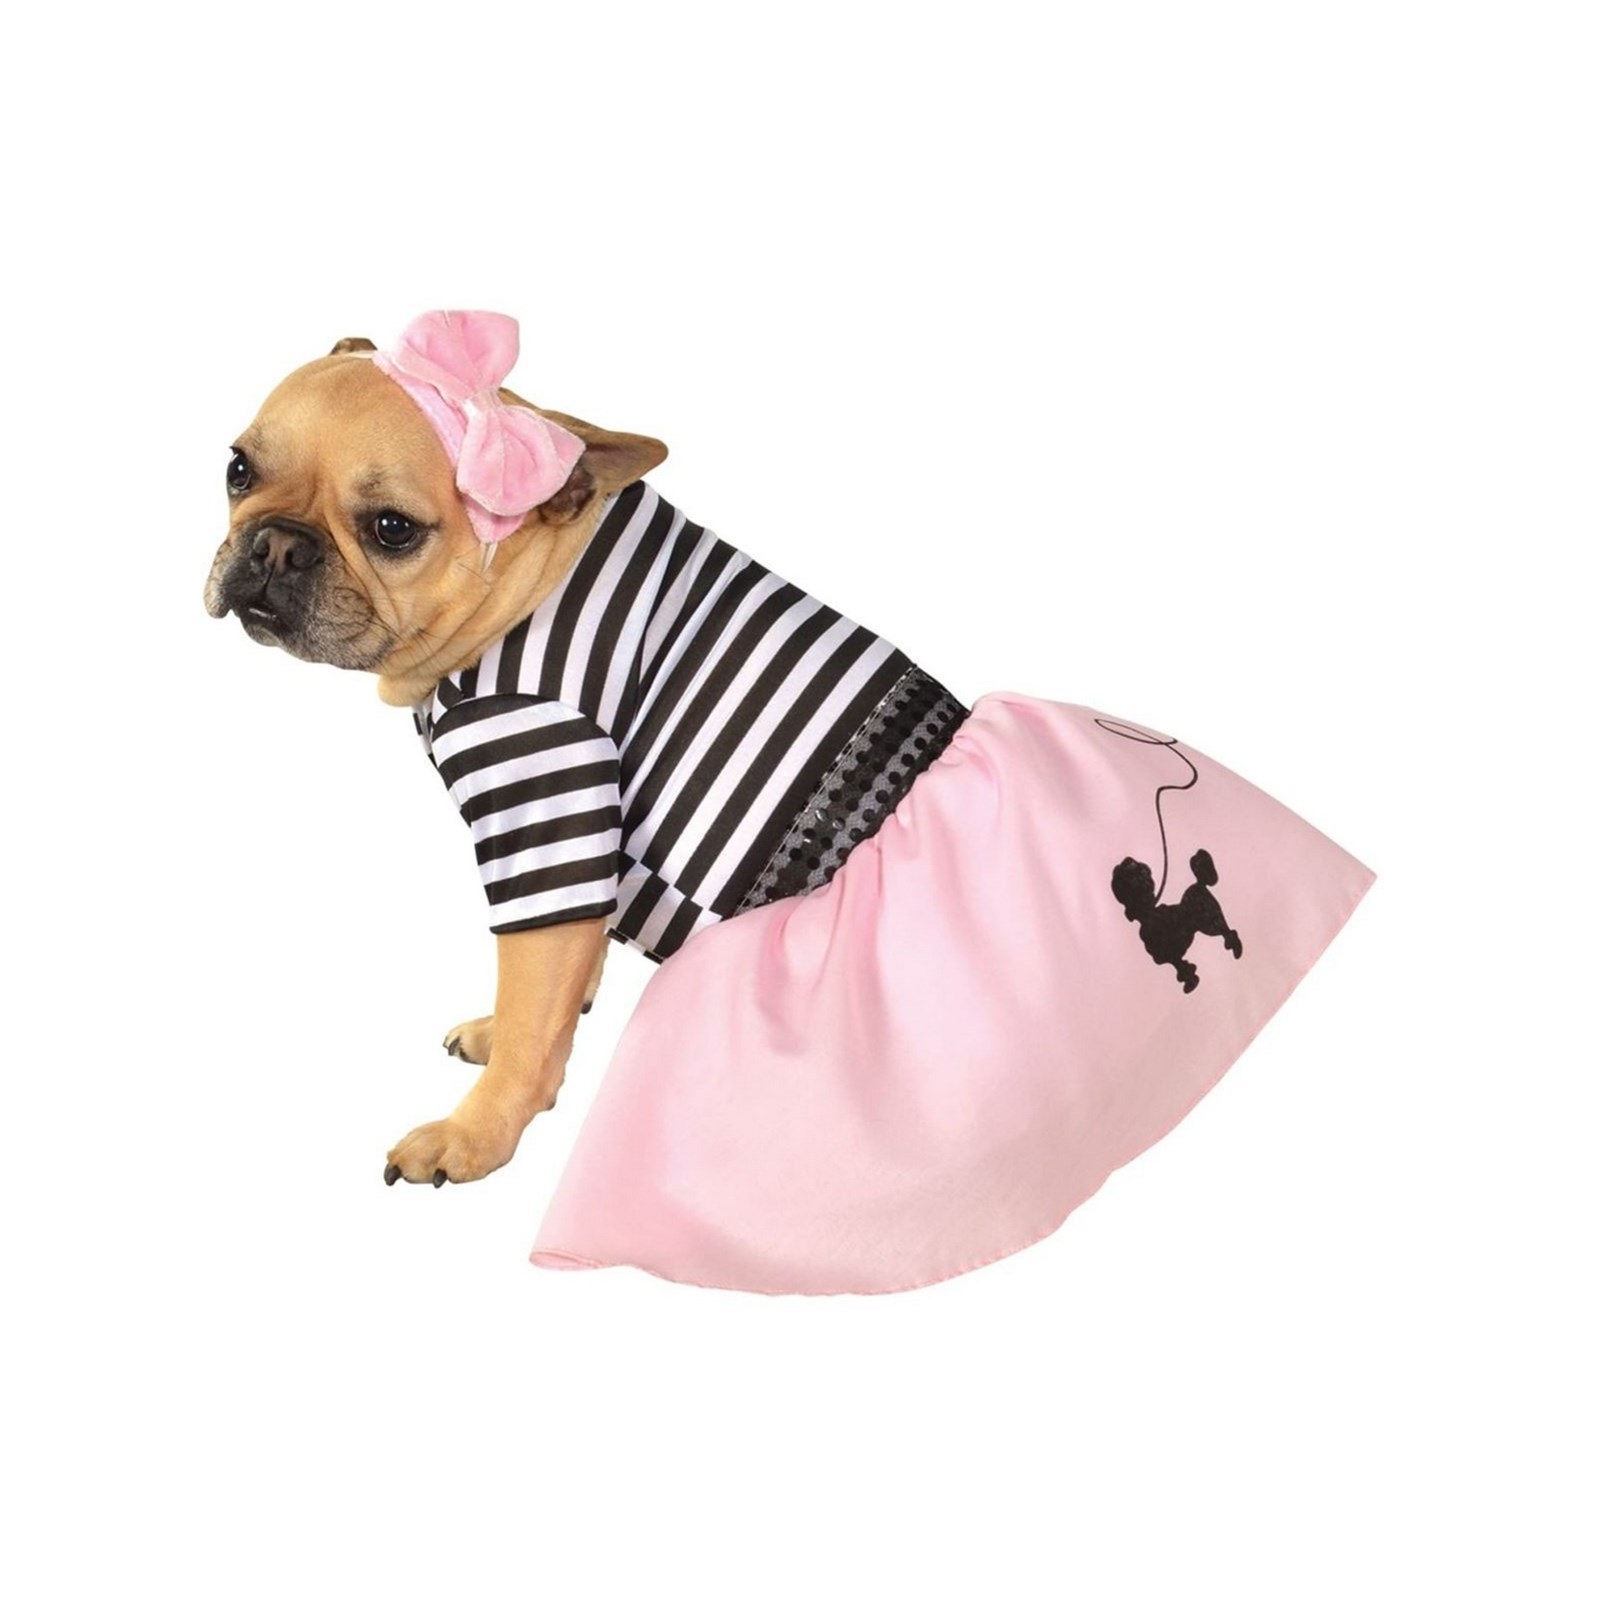 dog wearing the 50s costume